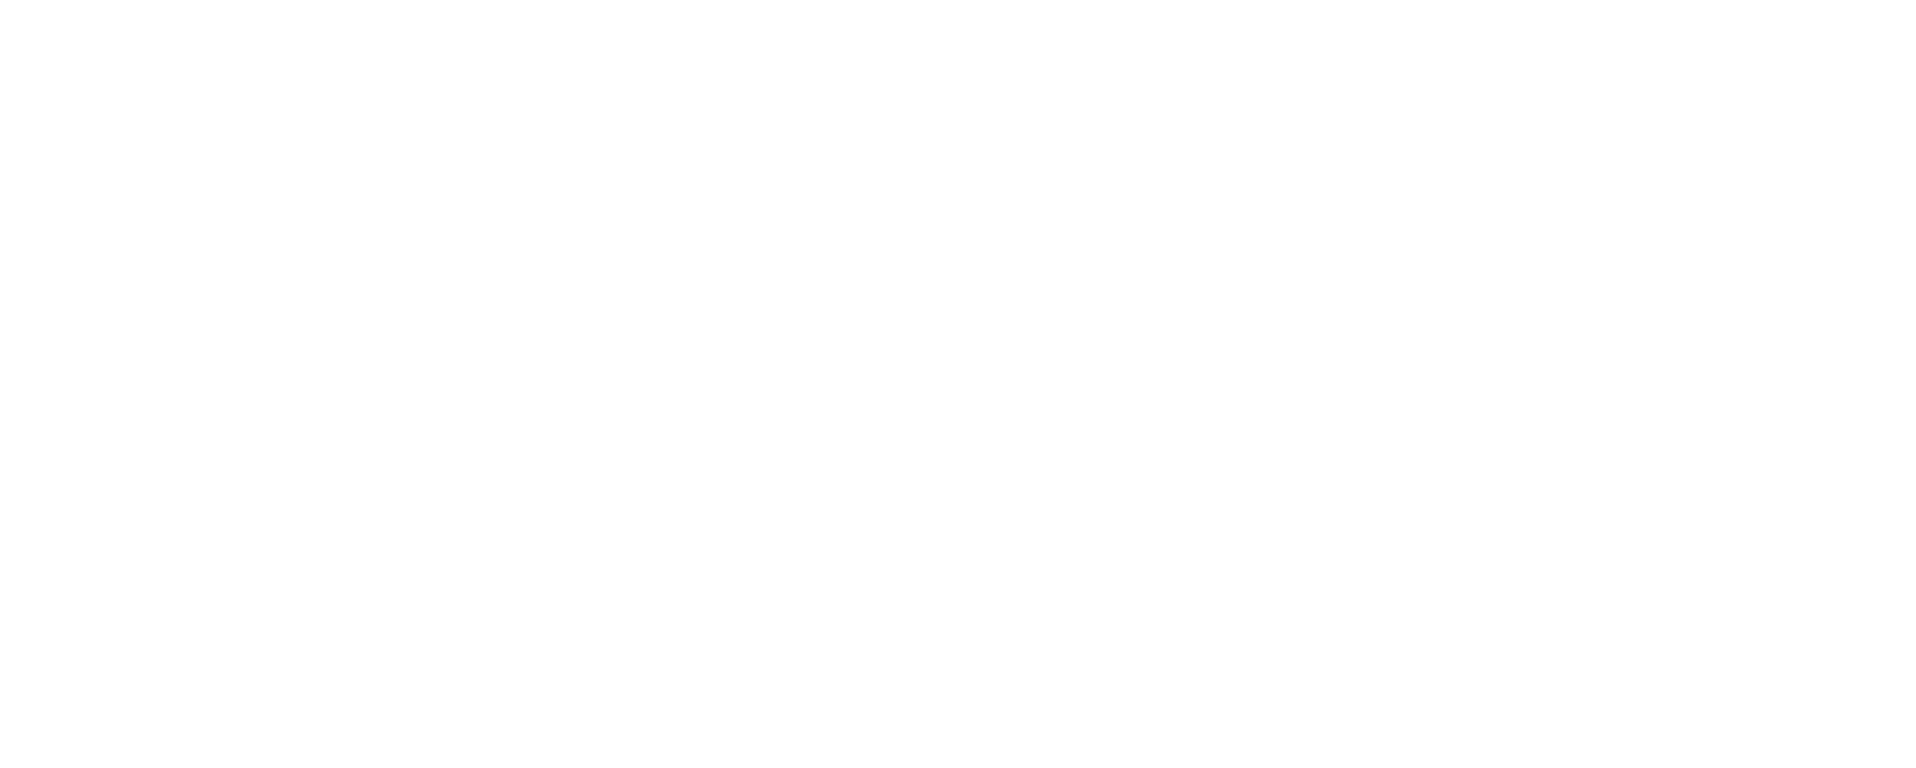 Estimated annual cost reduction